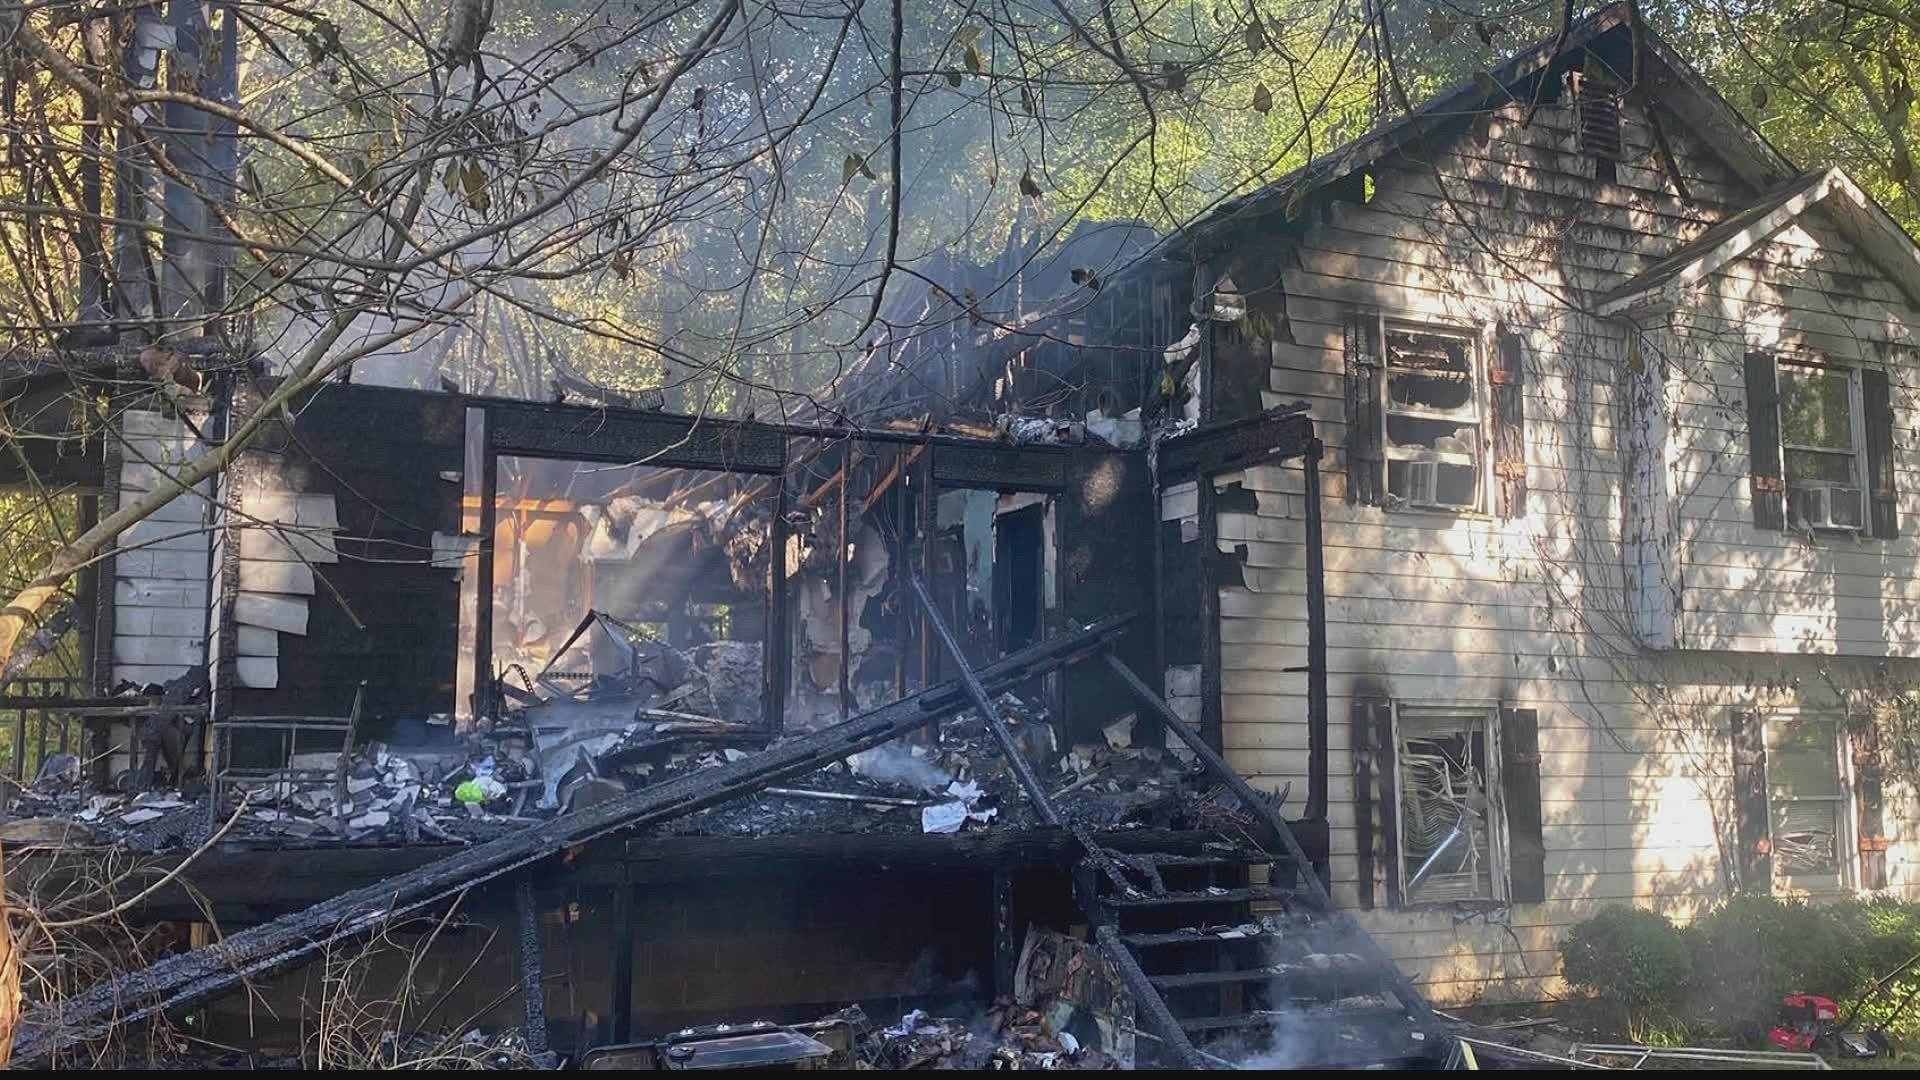 Fire officials said it happened shortly before 3:30 p.m. at a home along Baskin Road in Paulding County.